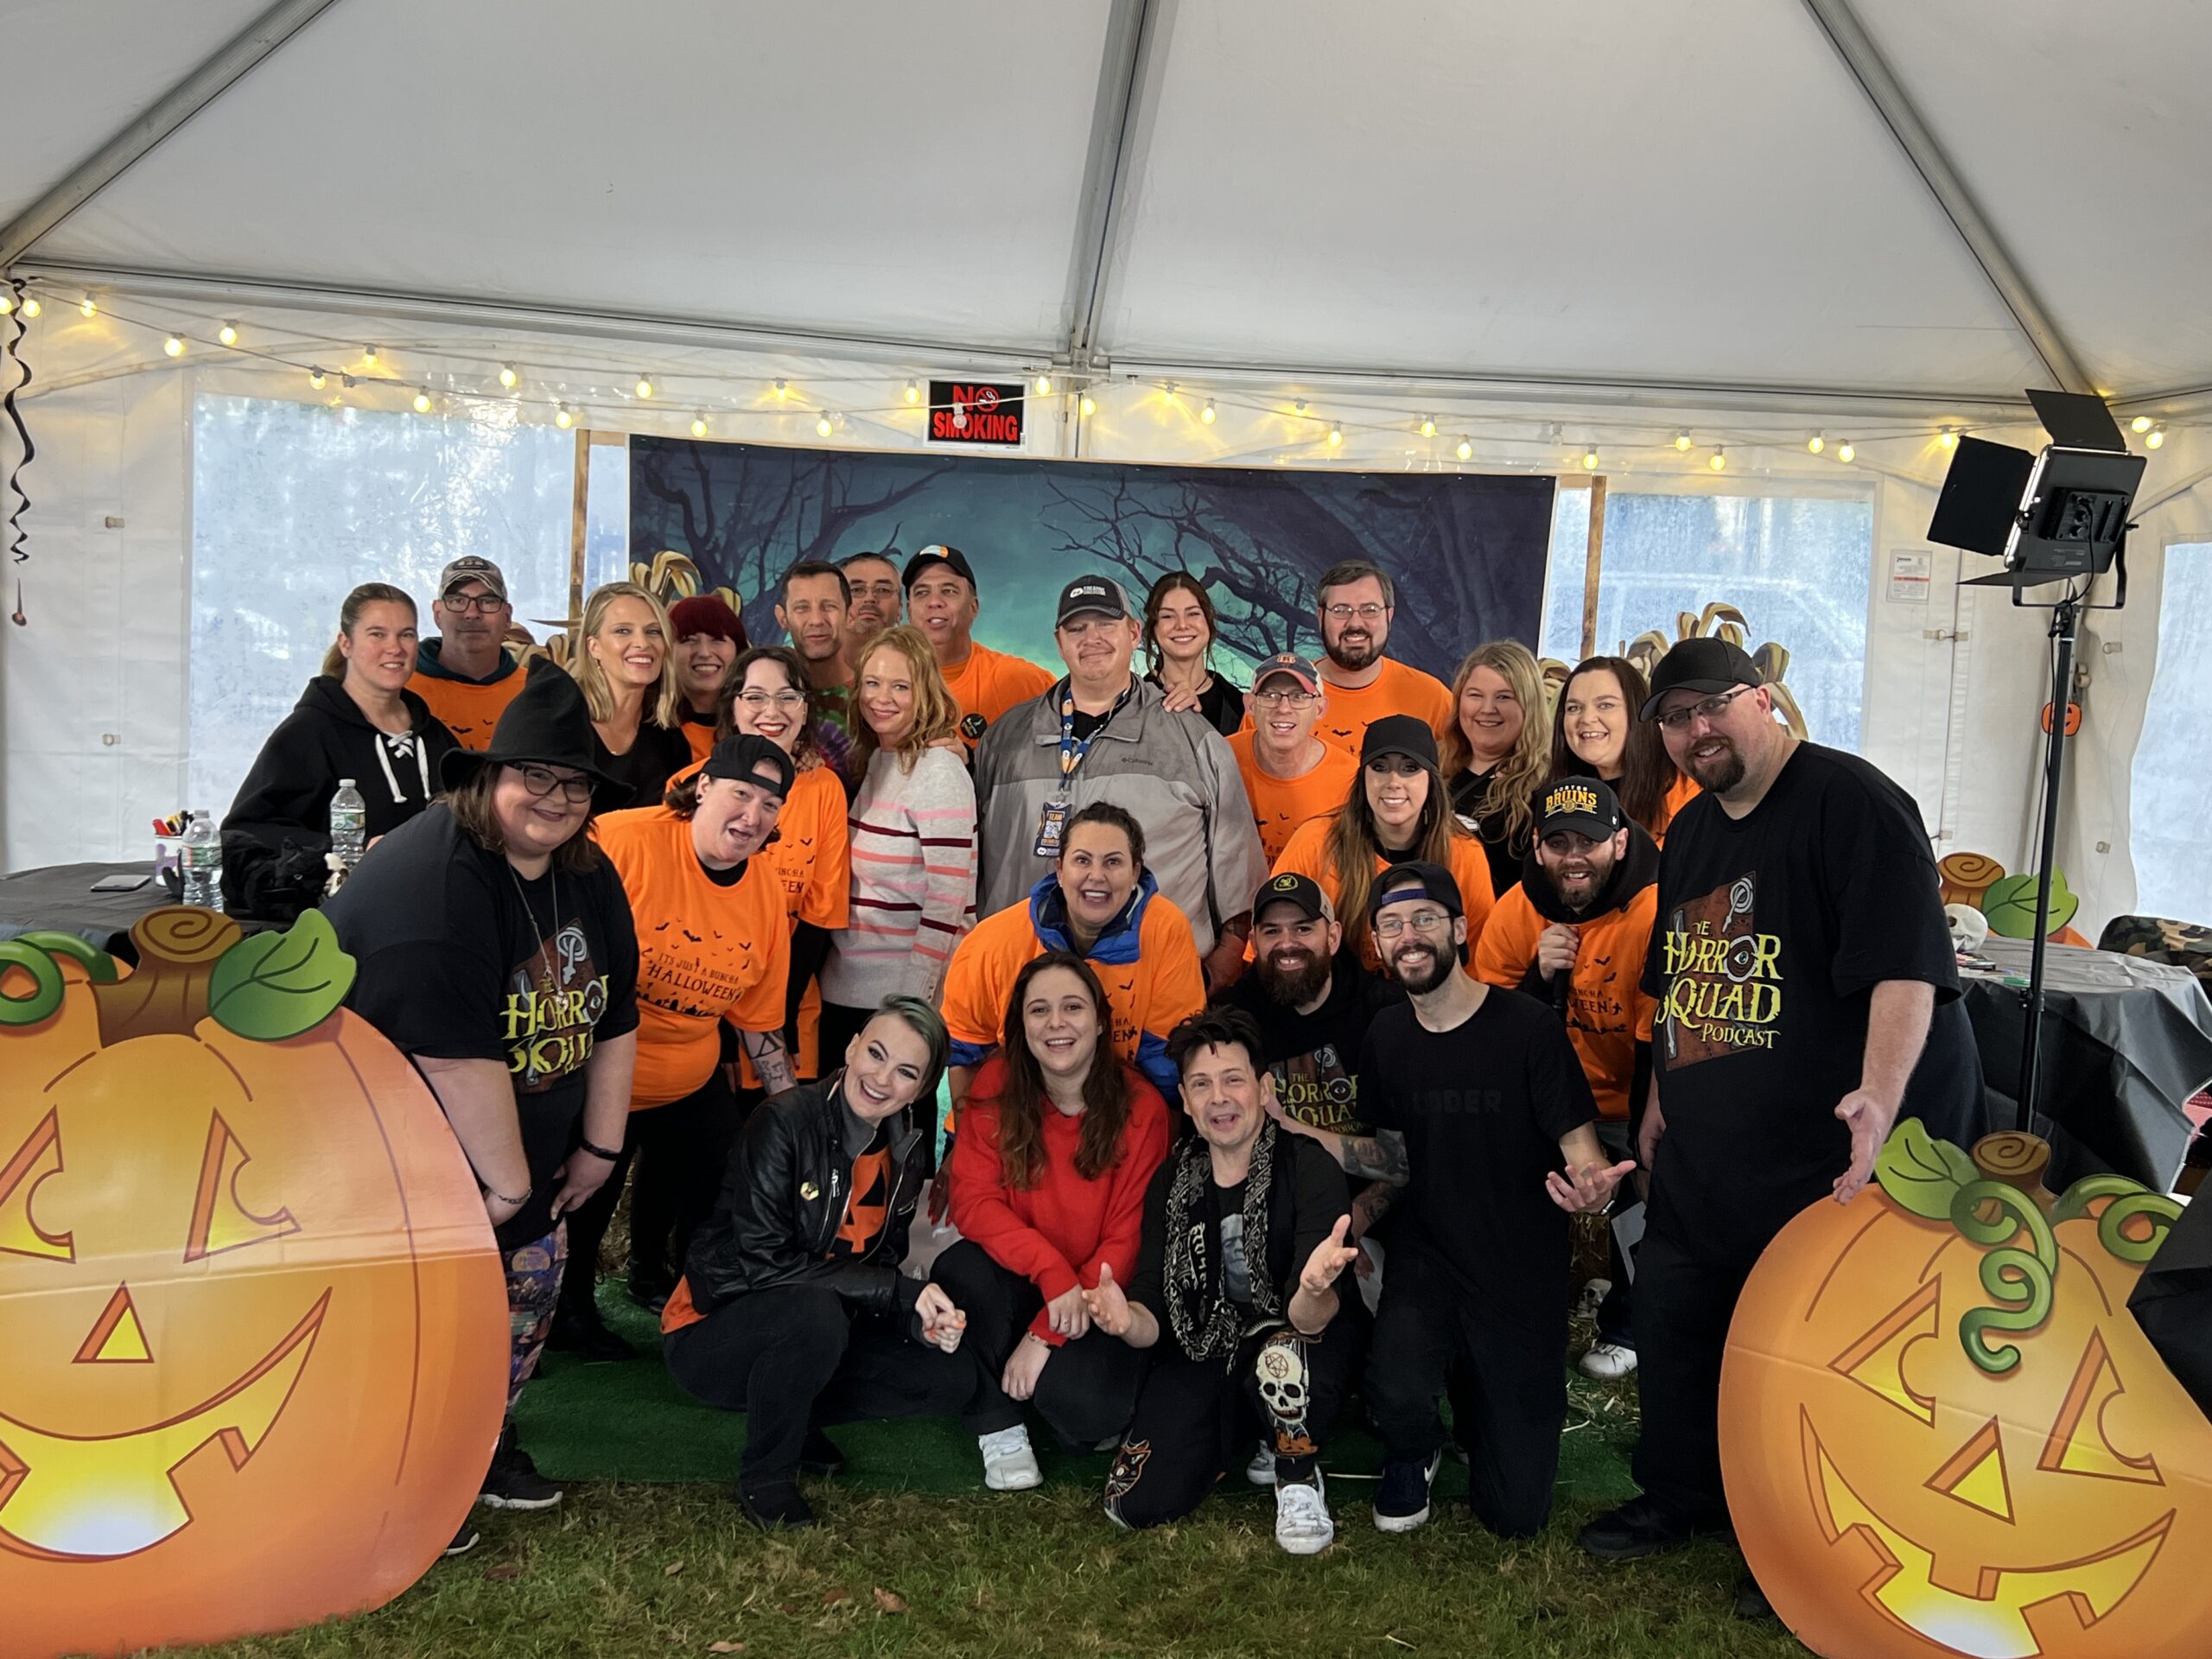 A group of people posing in front of a tent with pumpkins.